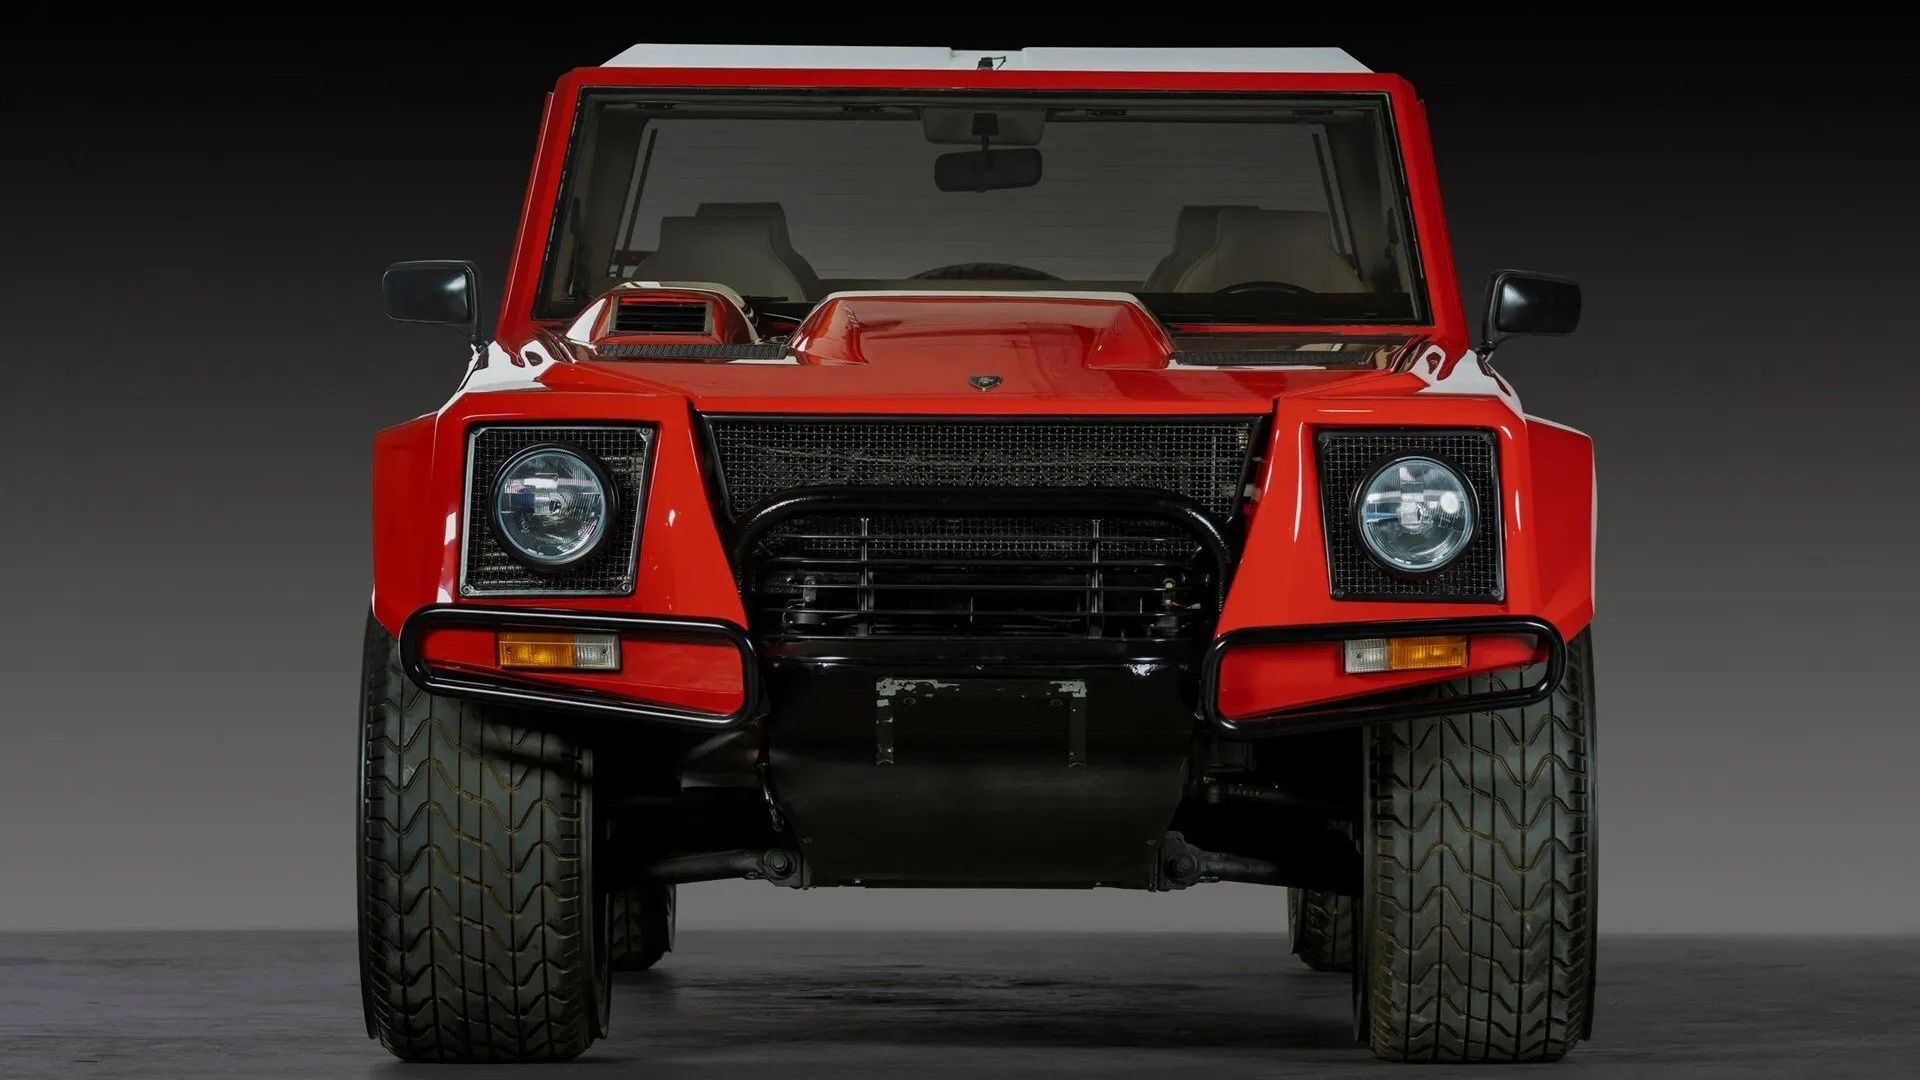 Front view of a red Lamborghini LM002 from 1991